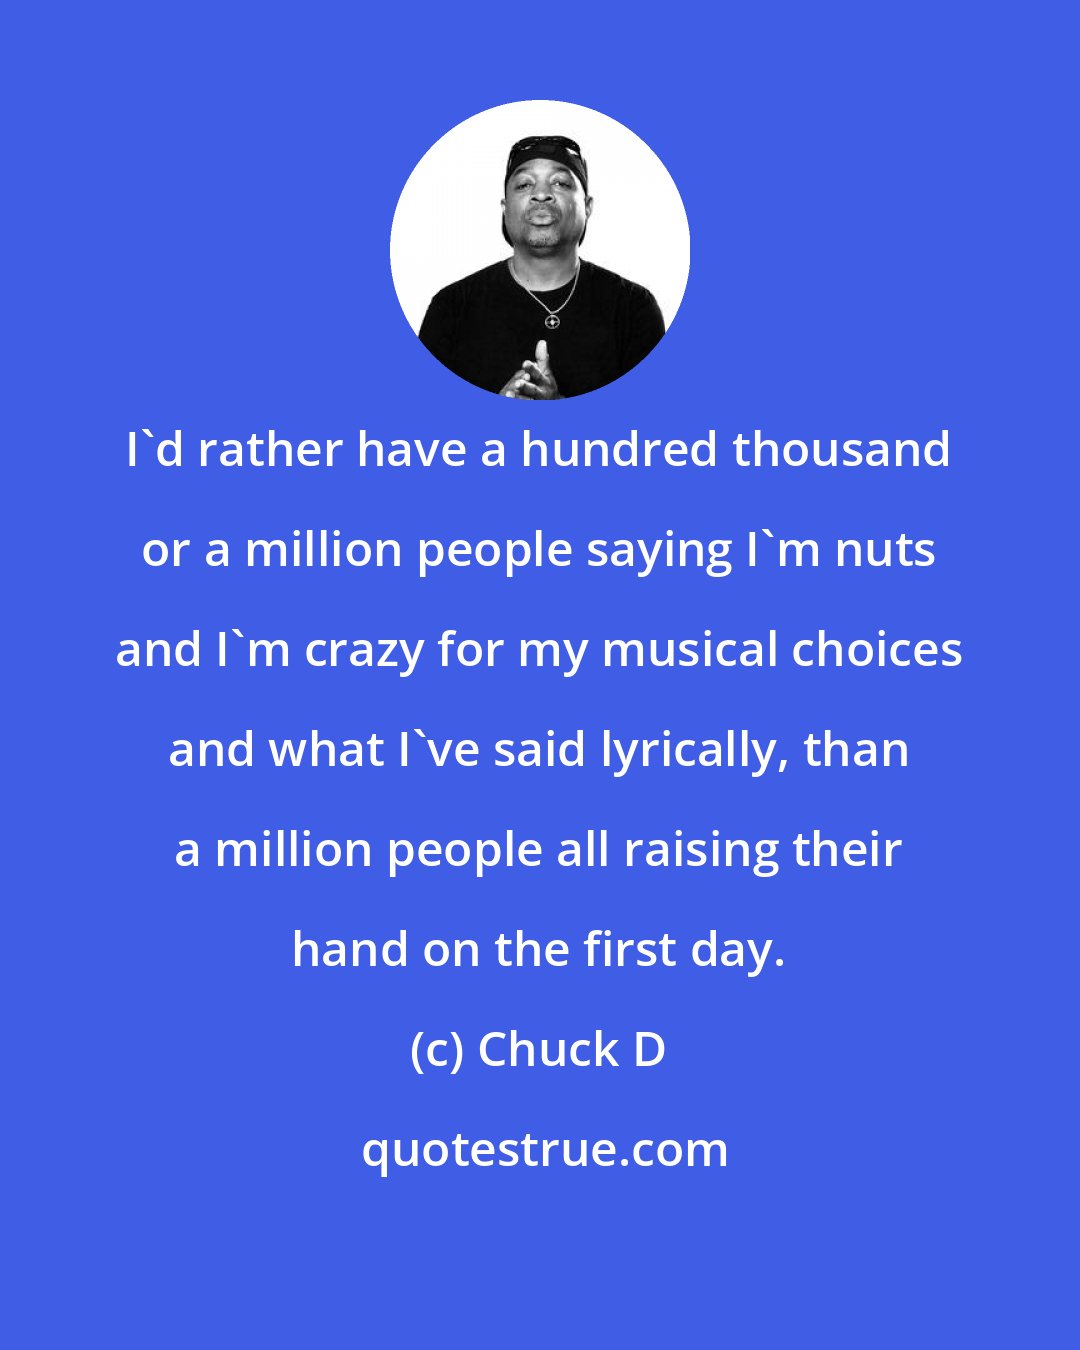 Chuck D: I'd rather have a hundred thousand or a million people saying I'm nuts and I'm crazy for my musical choices and what I've said lyrically, than a million people all raising their hand on the first day.